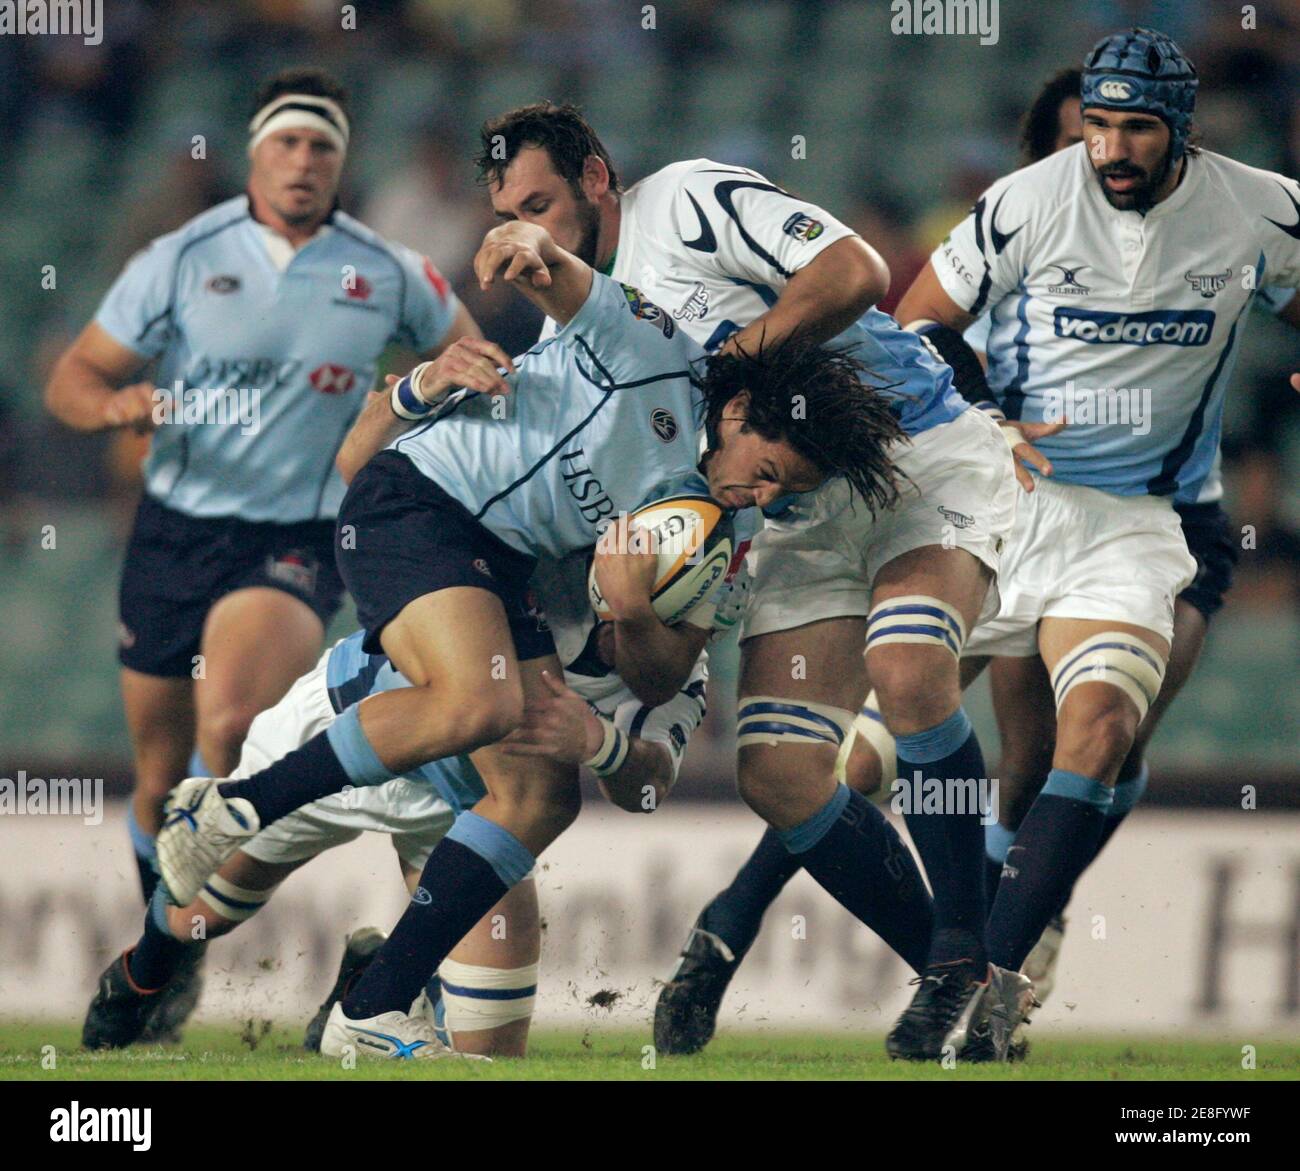 Daniel Halangahu of the Waratahs from Australia (2nd L) tries to break their defence of the Bulls from South Africa during their Super 14 rugby match in Sydney March 10, 2007. REUTERS/Will Burgess   (AUSTRALIA) Stock Photo